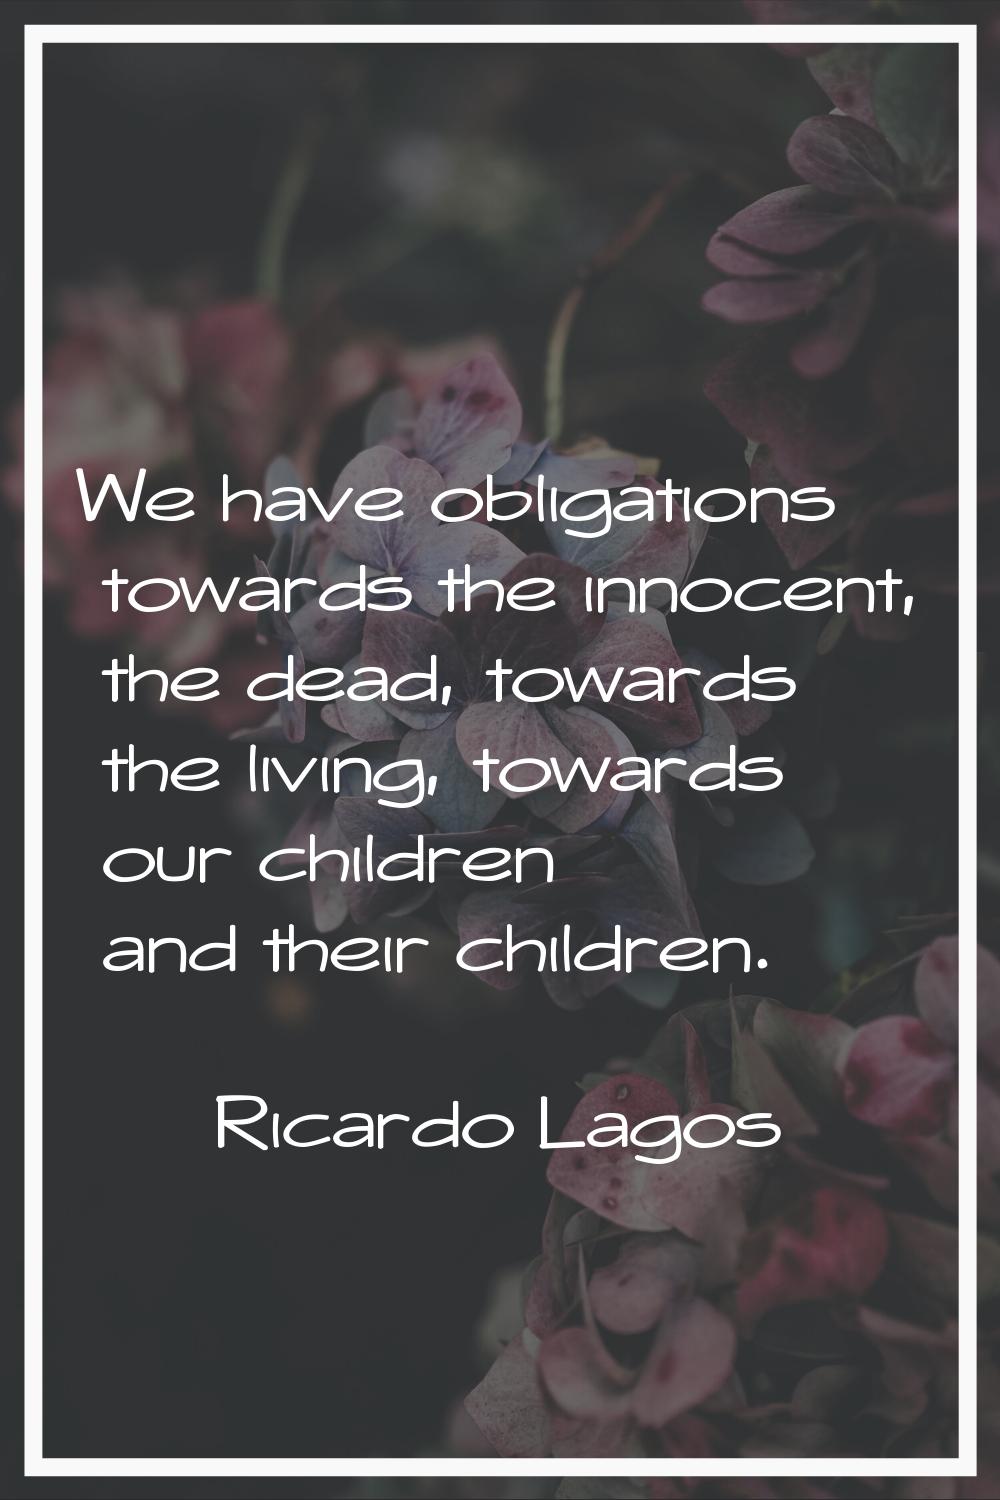 We have obligations towards the innocent, the dead, towards the living, towards our children and th